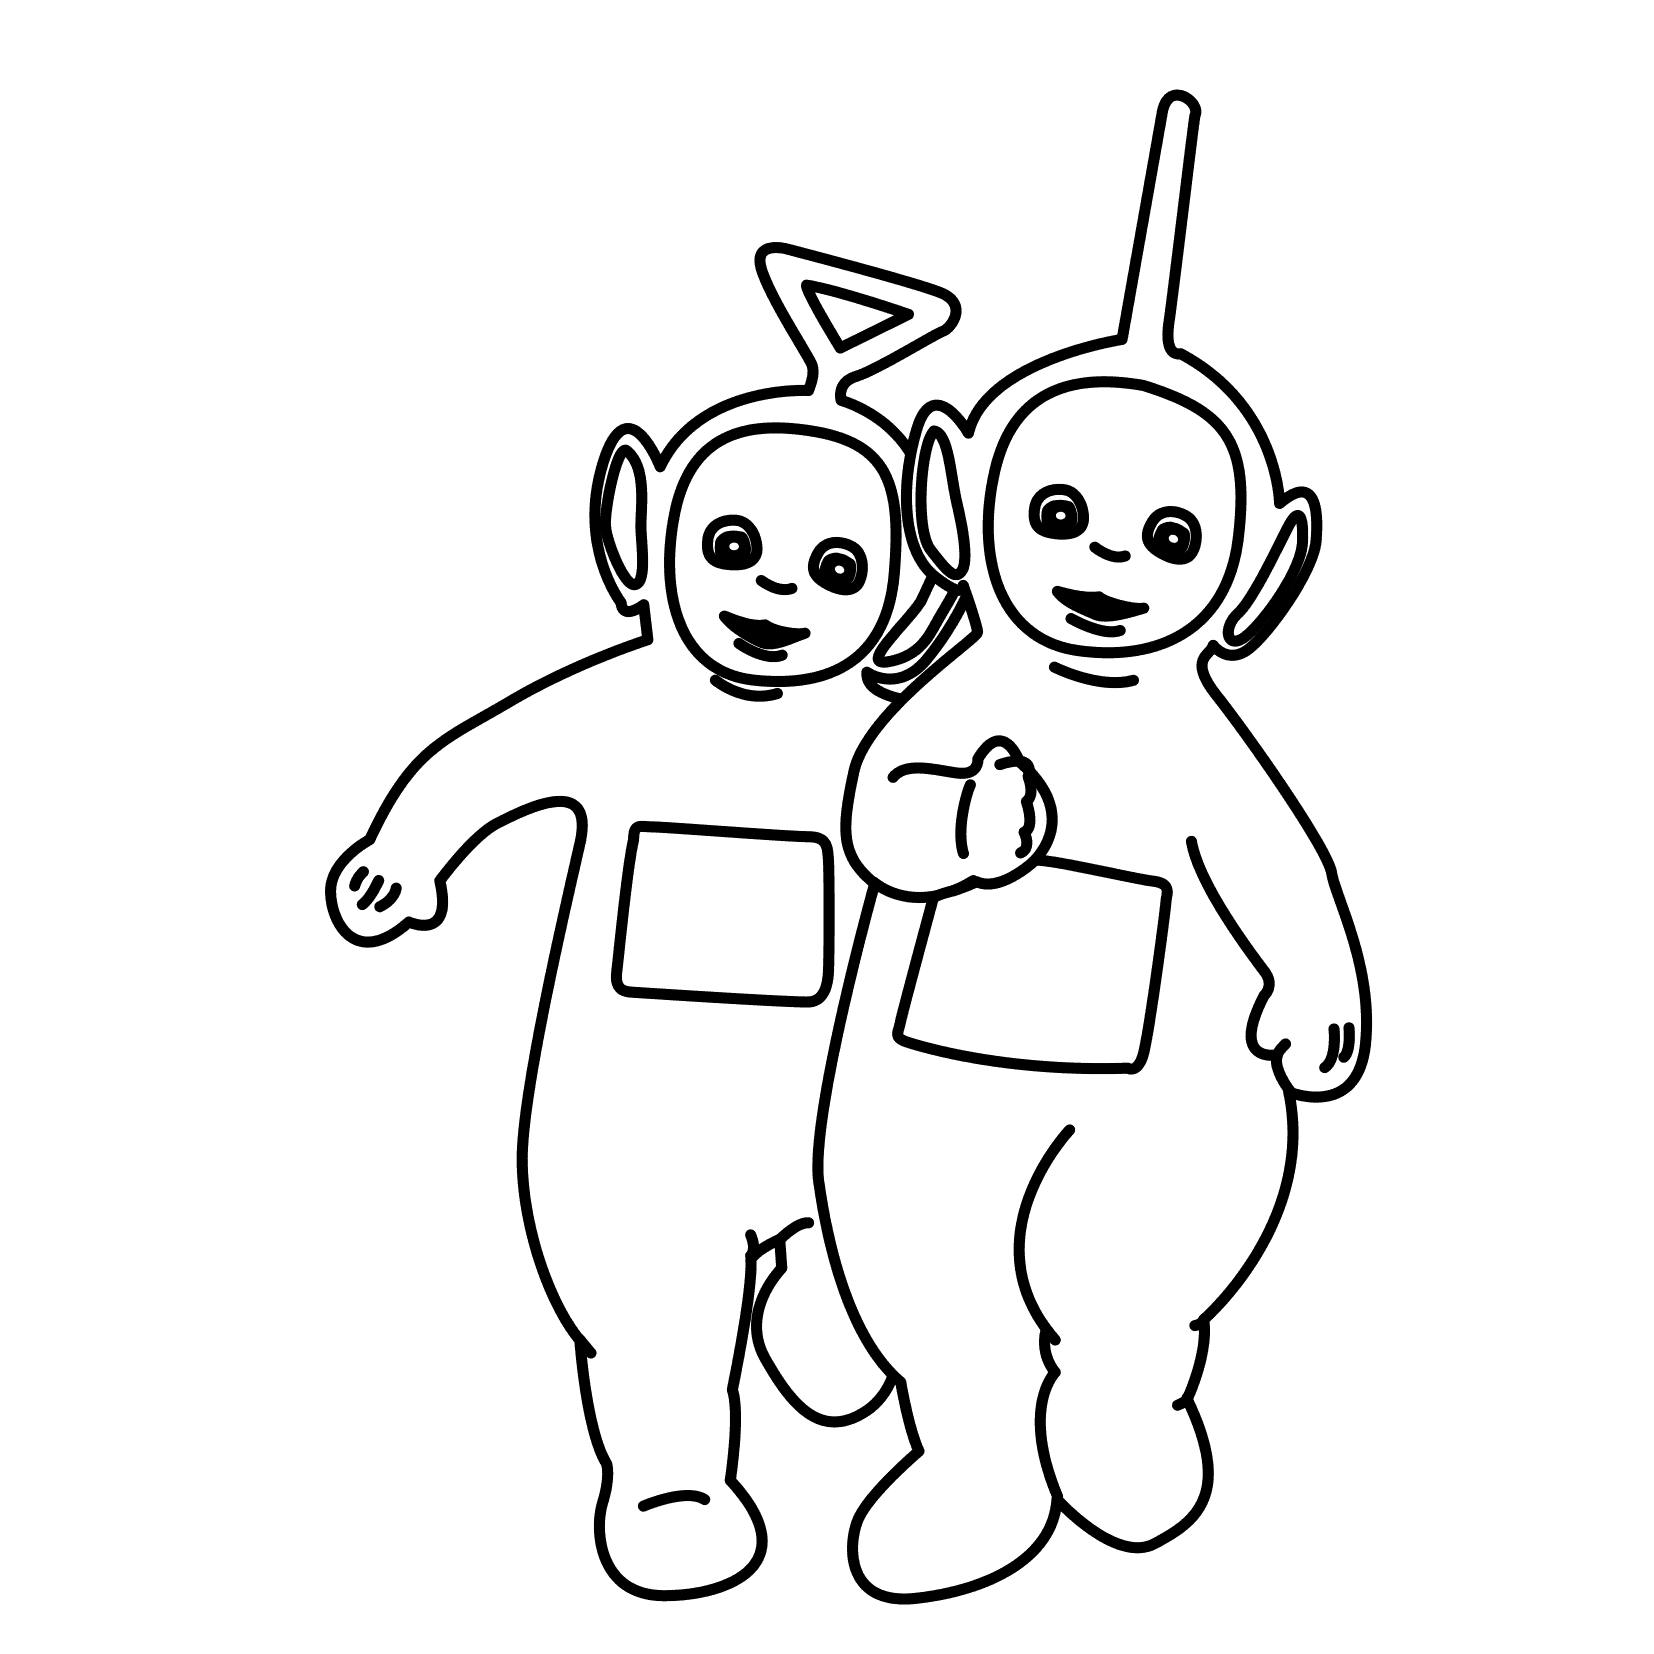 teletubbies colouring pages free printable teletubbies coloring pages for kids teletubbies colouring pages 